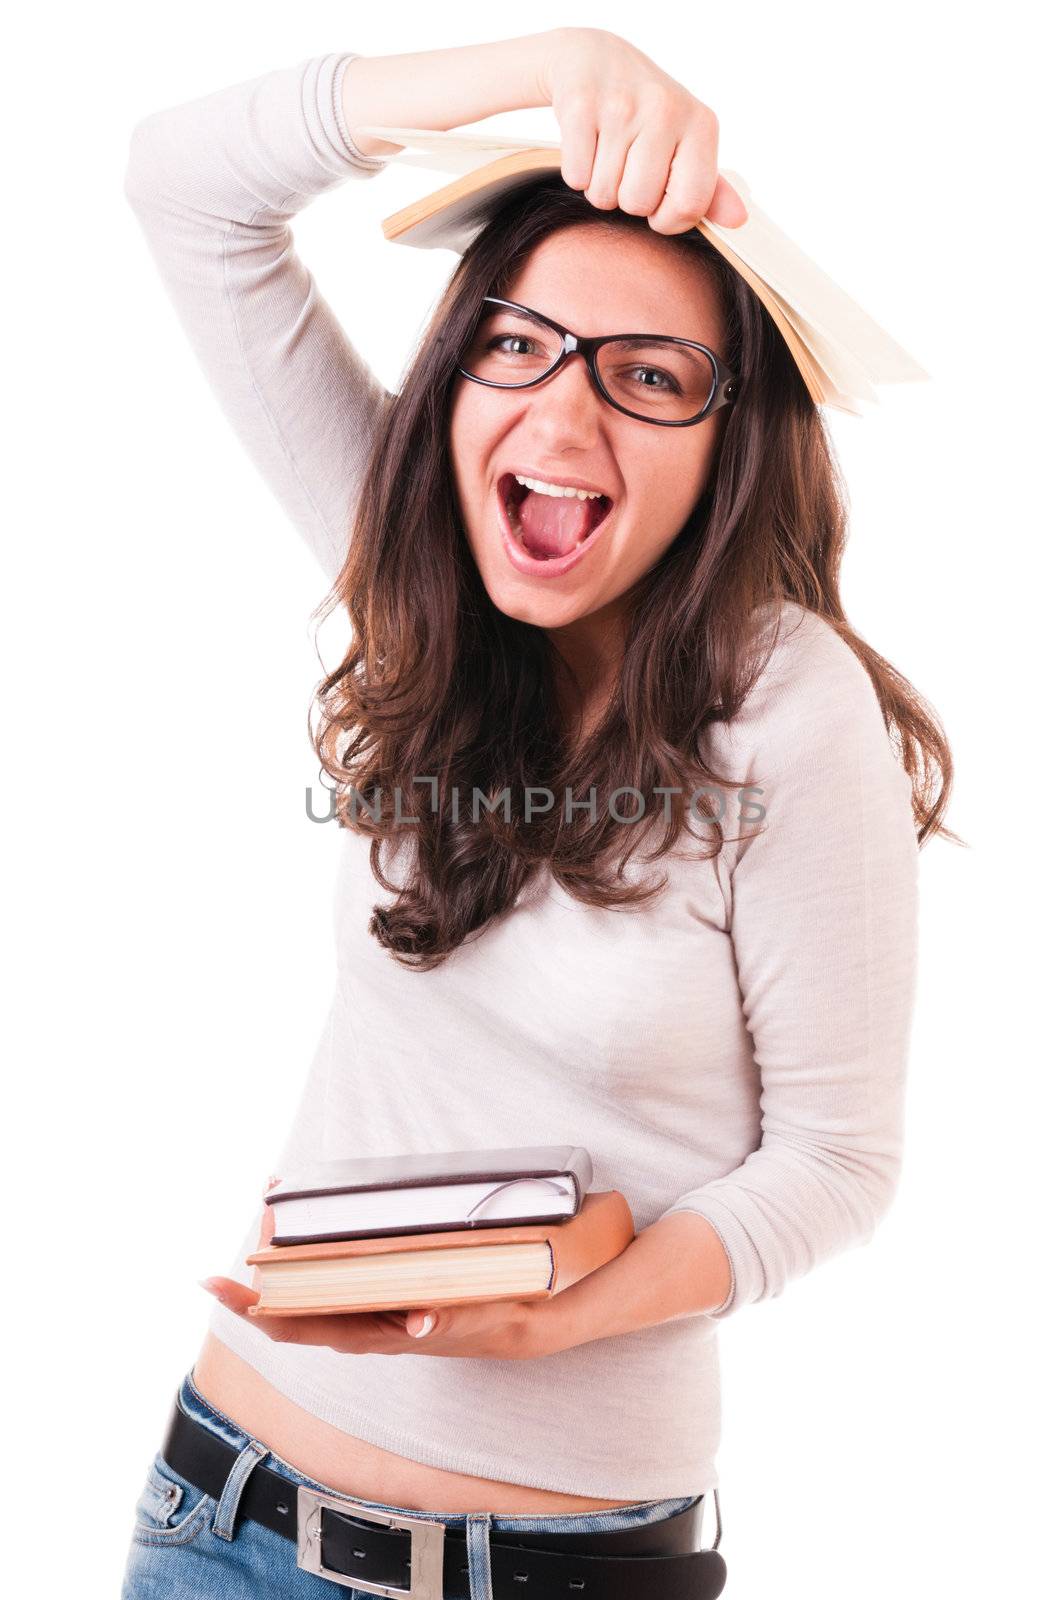 Shouting young woman with books by iryna_rasko